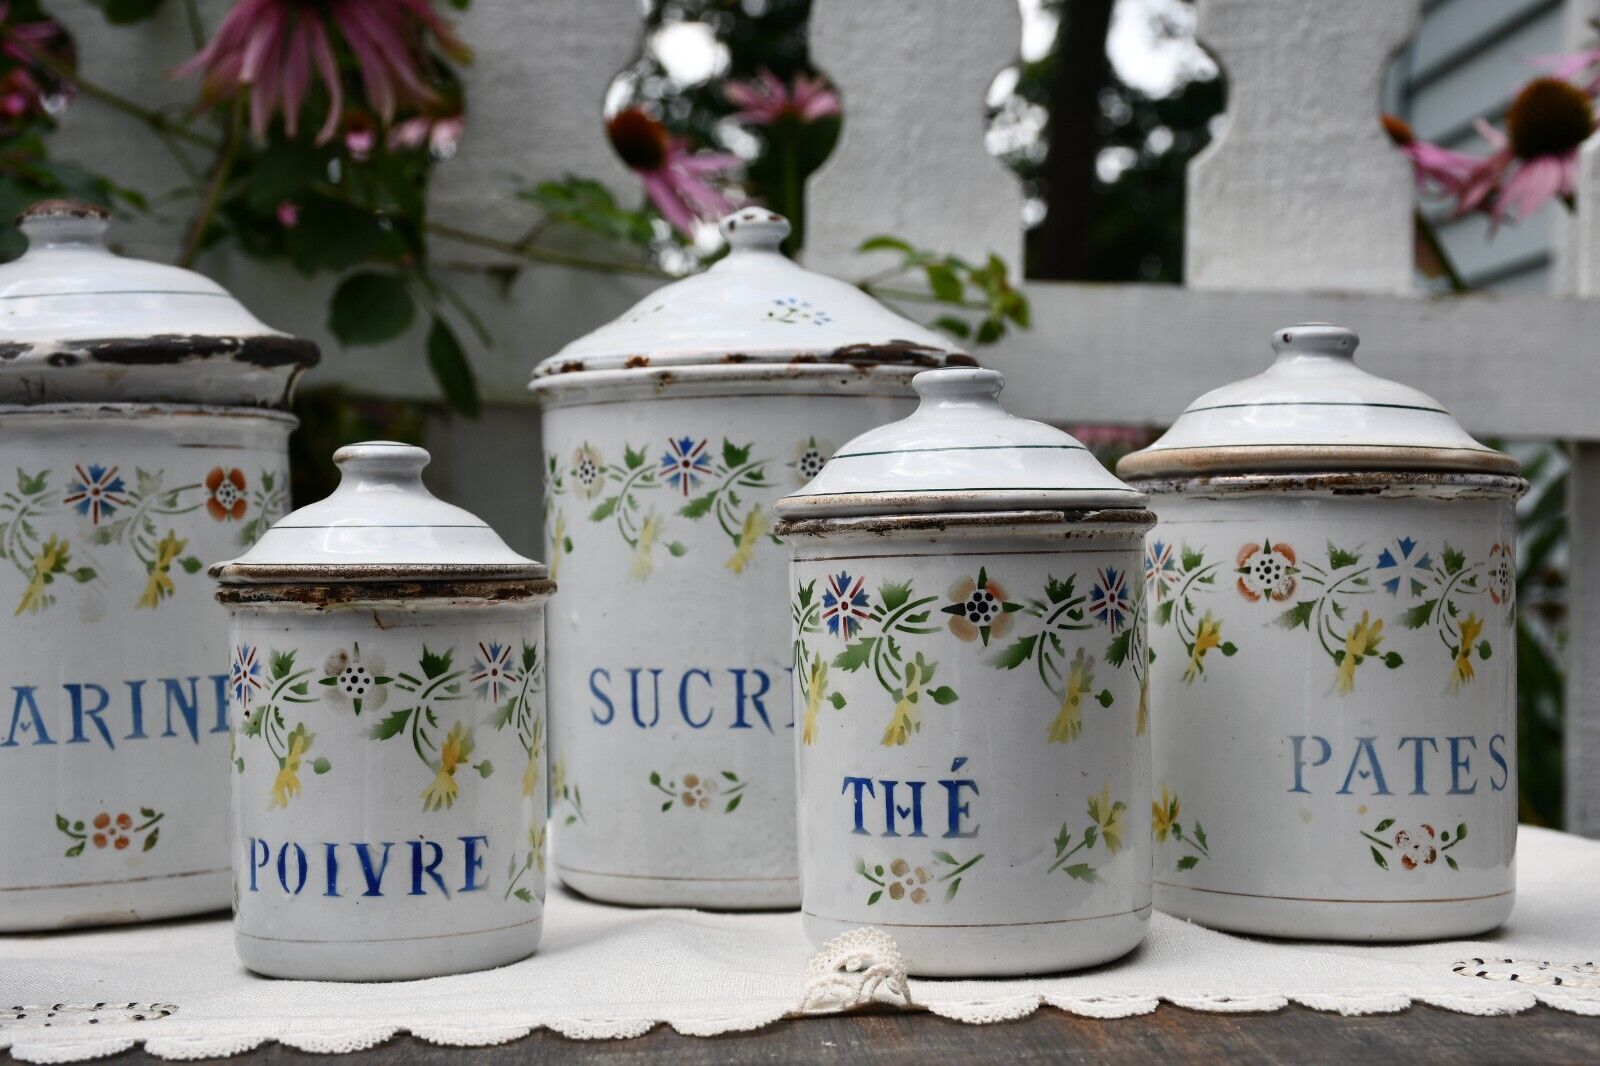 Full set (6) French Antique Flower Enamel BB Freres Kitchen Canisters Containers